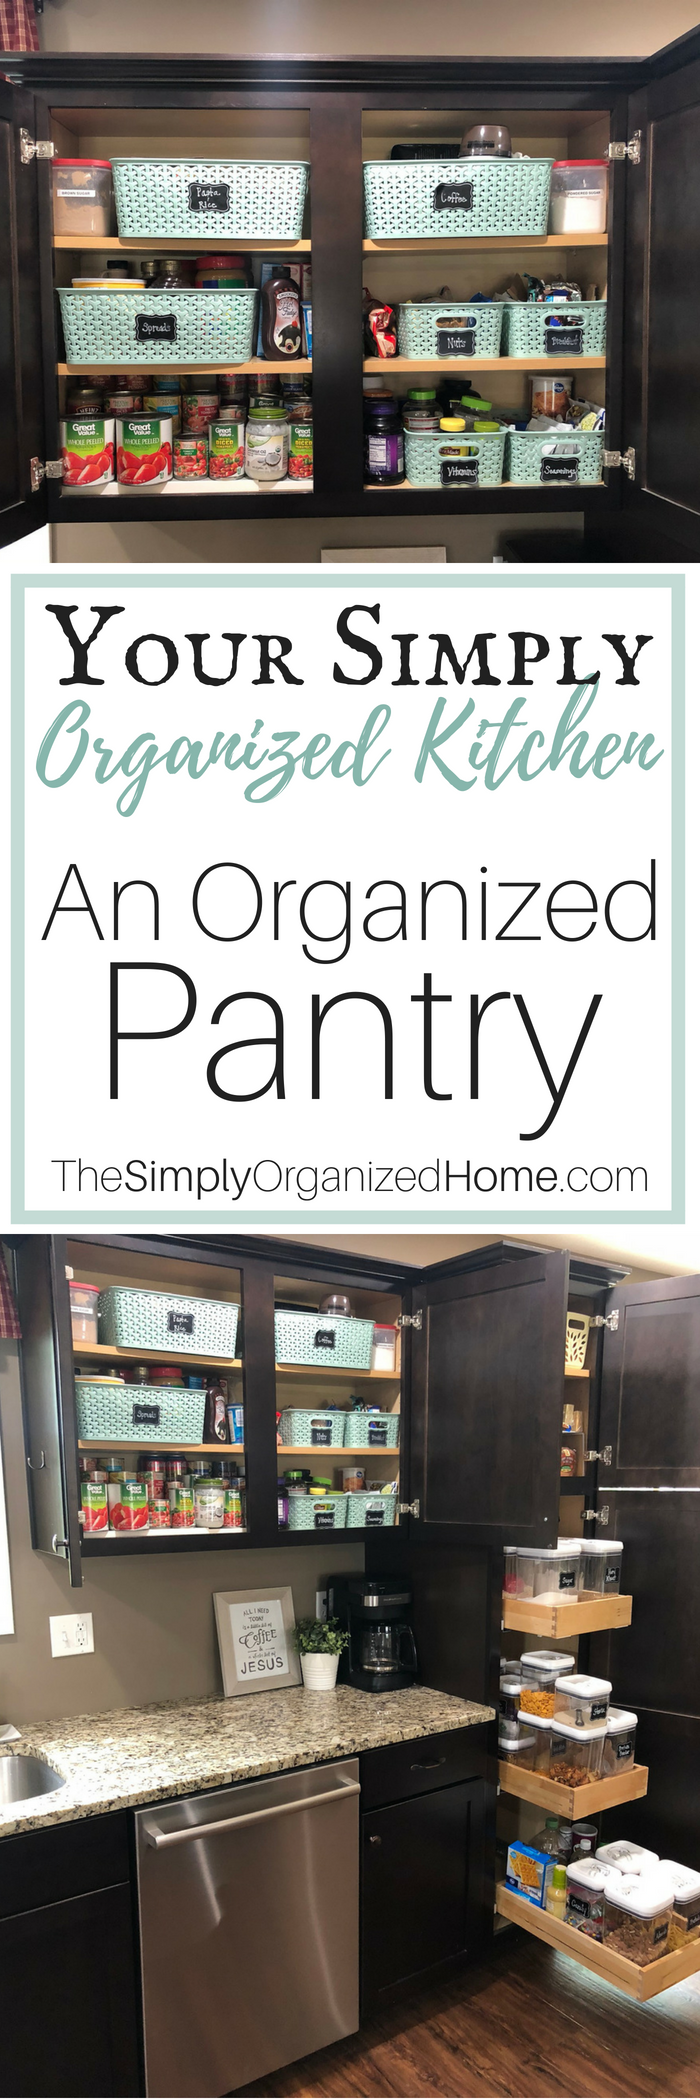 https://www.thesimplyorganizedhome.com/wp-content/uploads/2018/07/An-Organized-Pantry.png